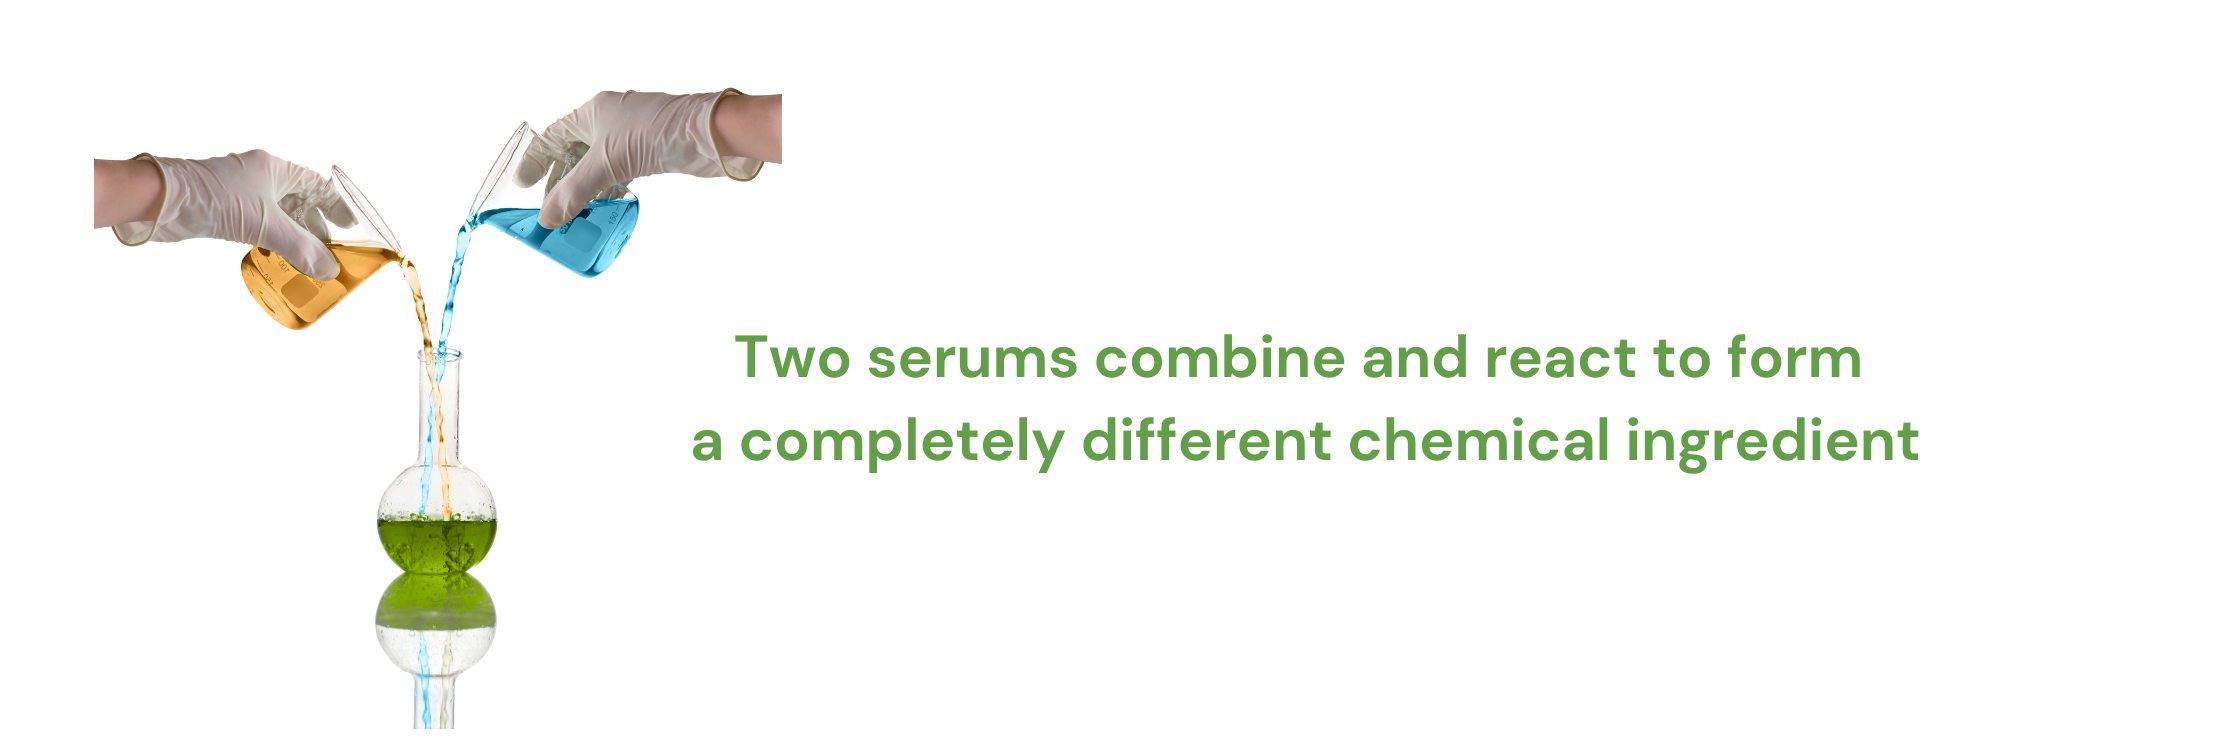 when you put two different serums it mixes to create a different chemical ingredient